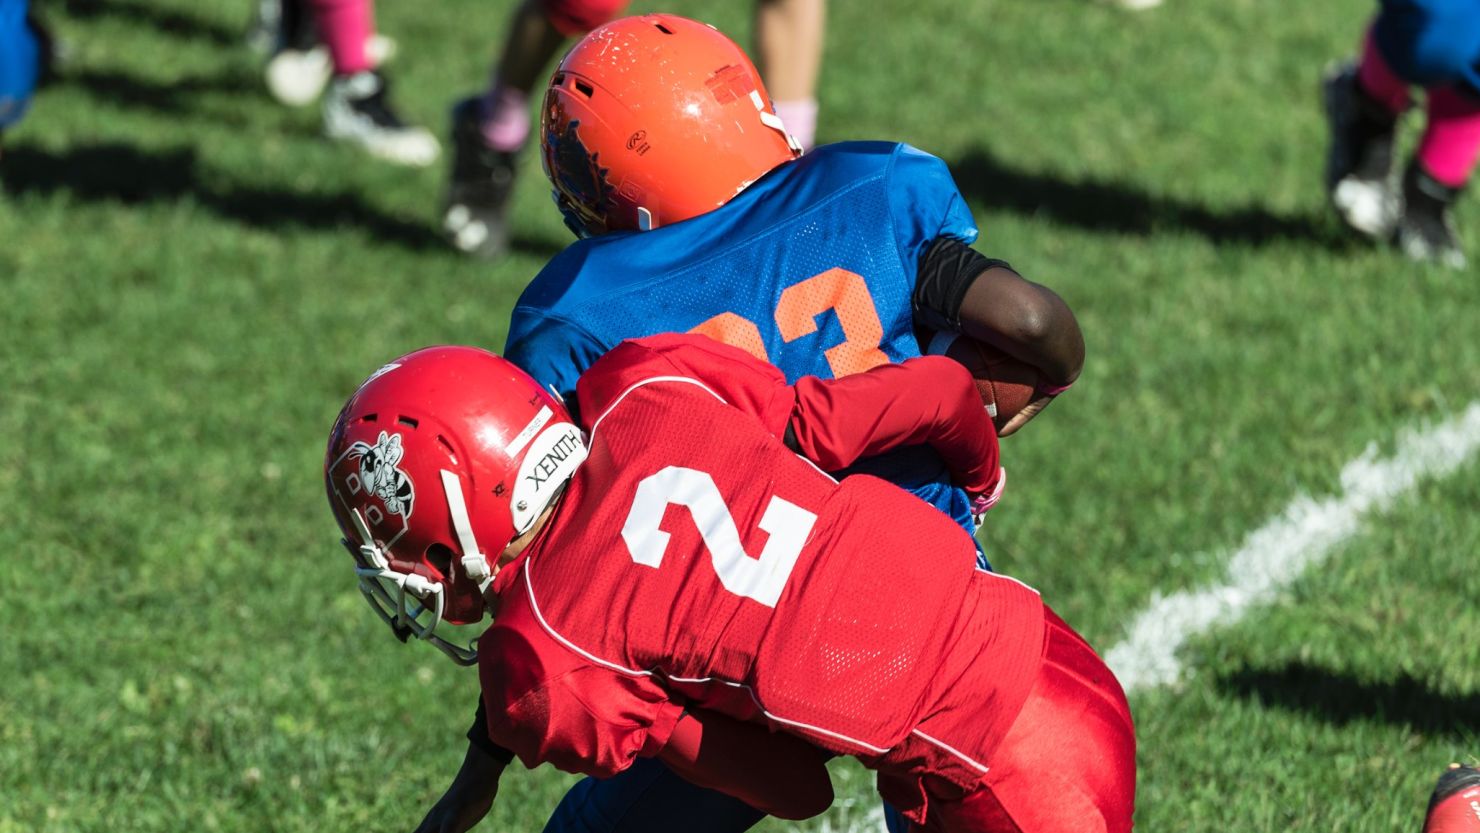 A player makes a tackle during a Pop Warner football game in Syracuse, New York. 